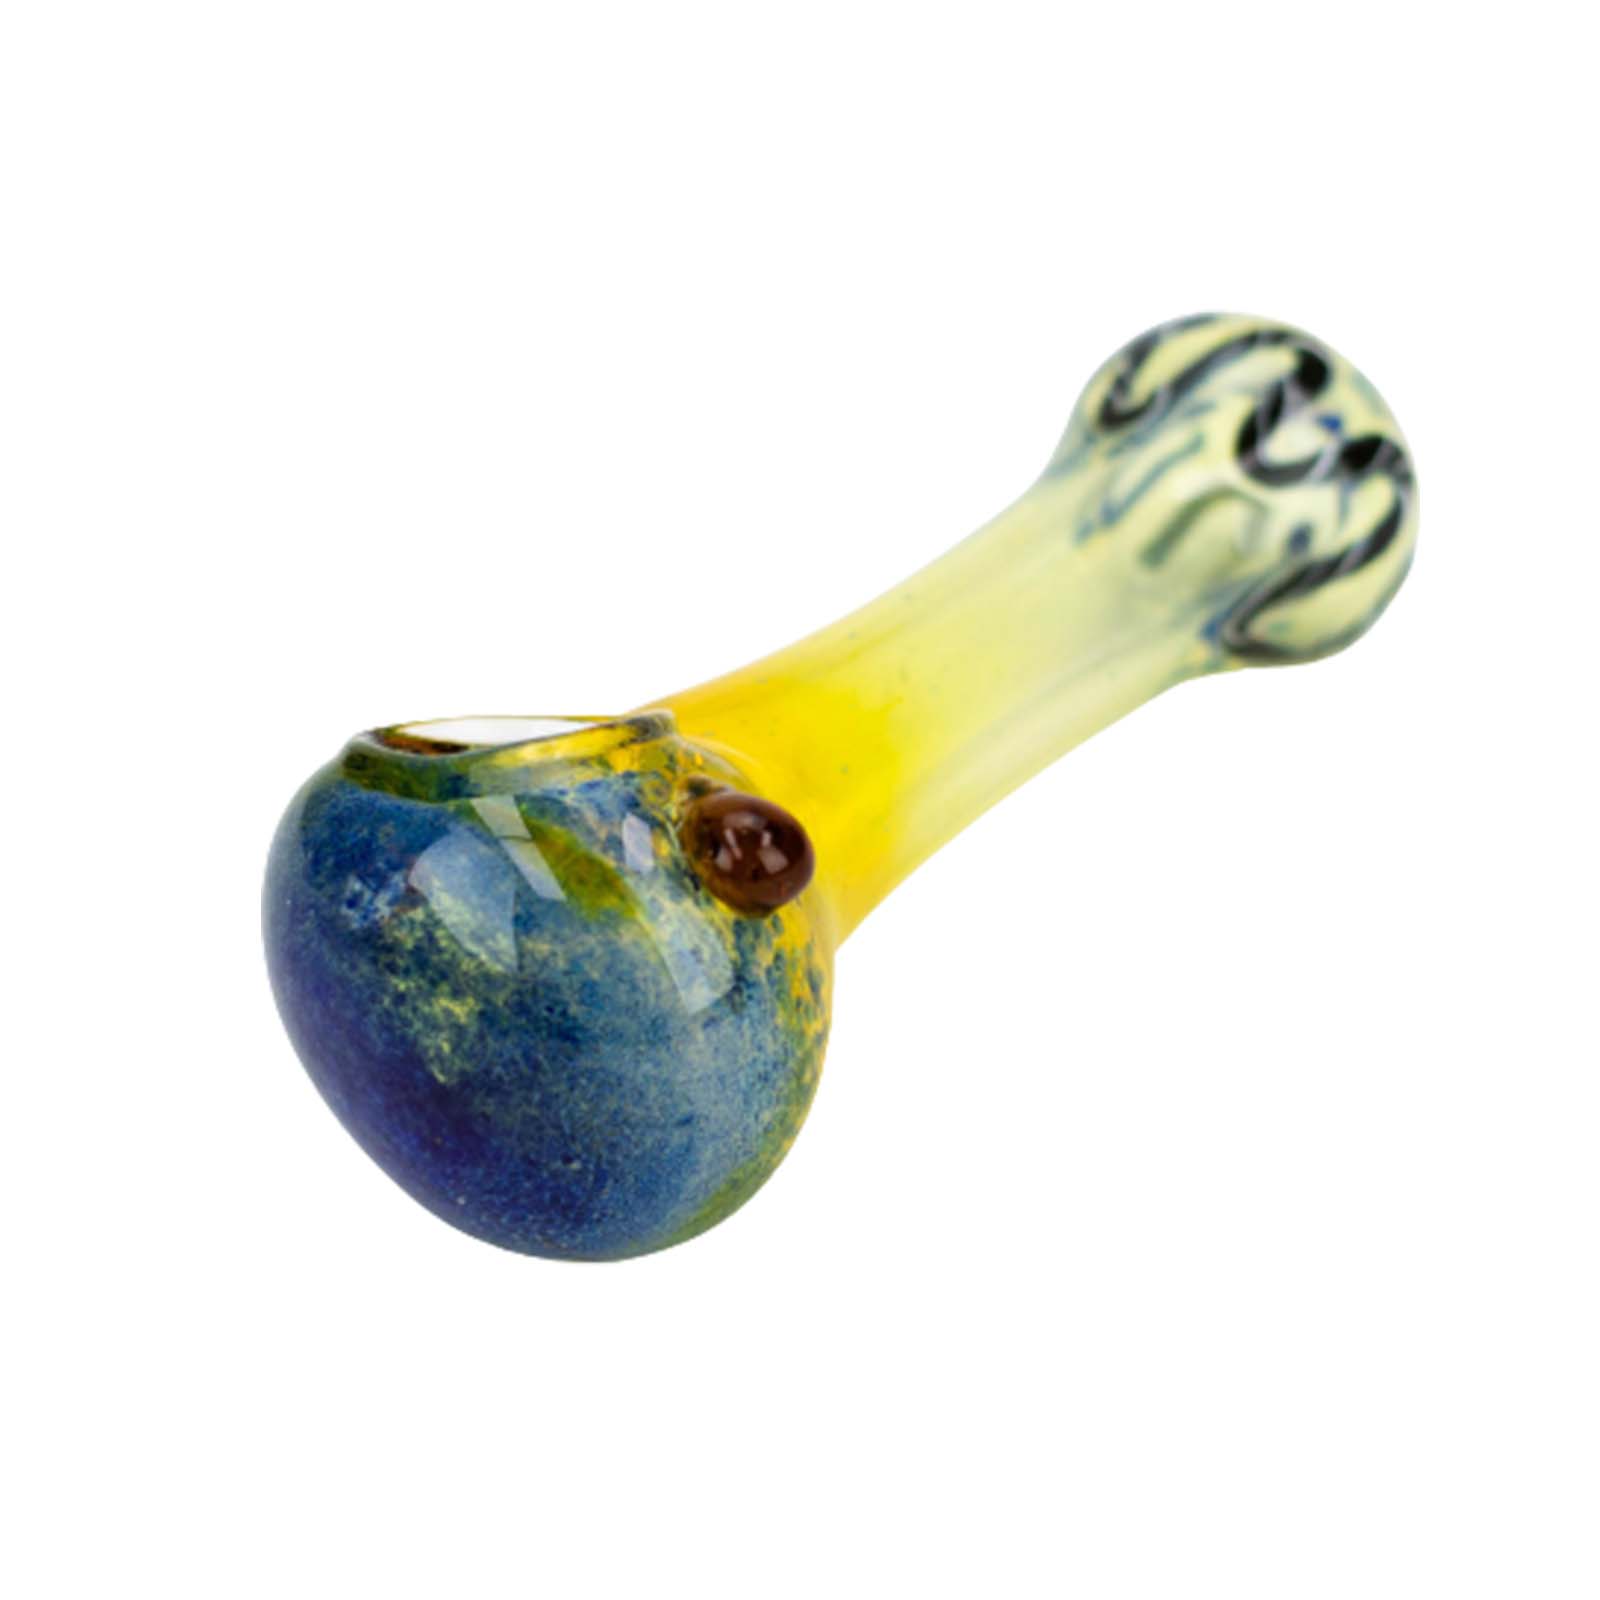 4.5" Soft Glass Hand Pipes - Pack of 2